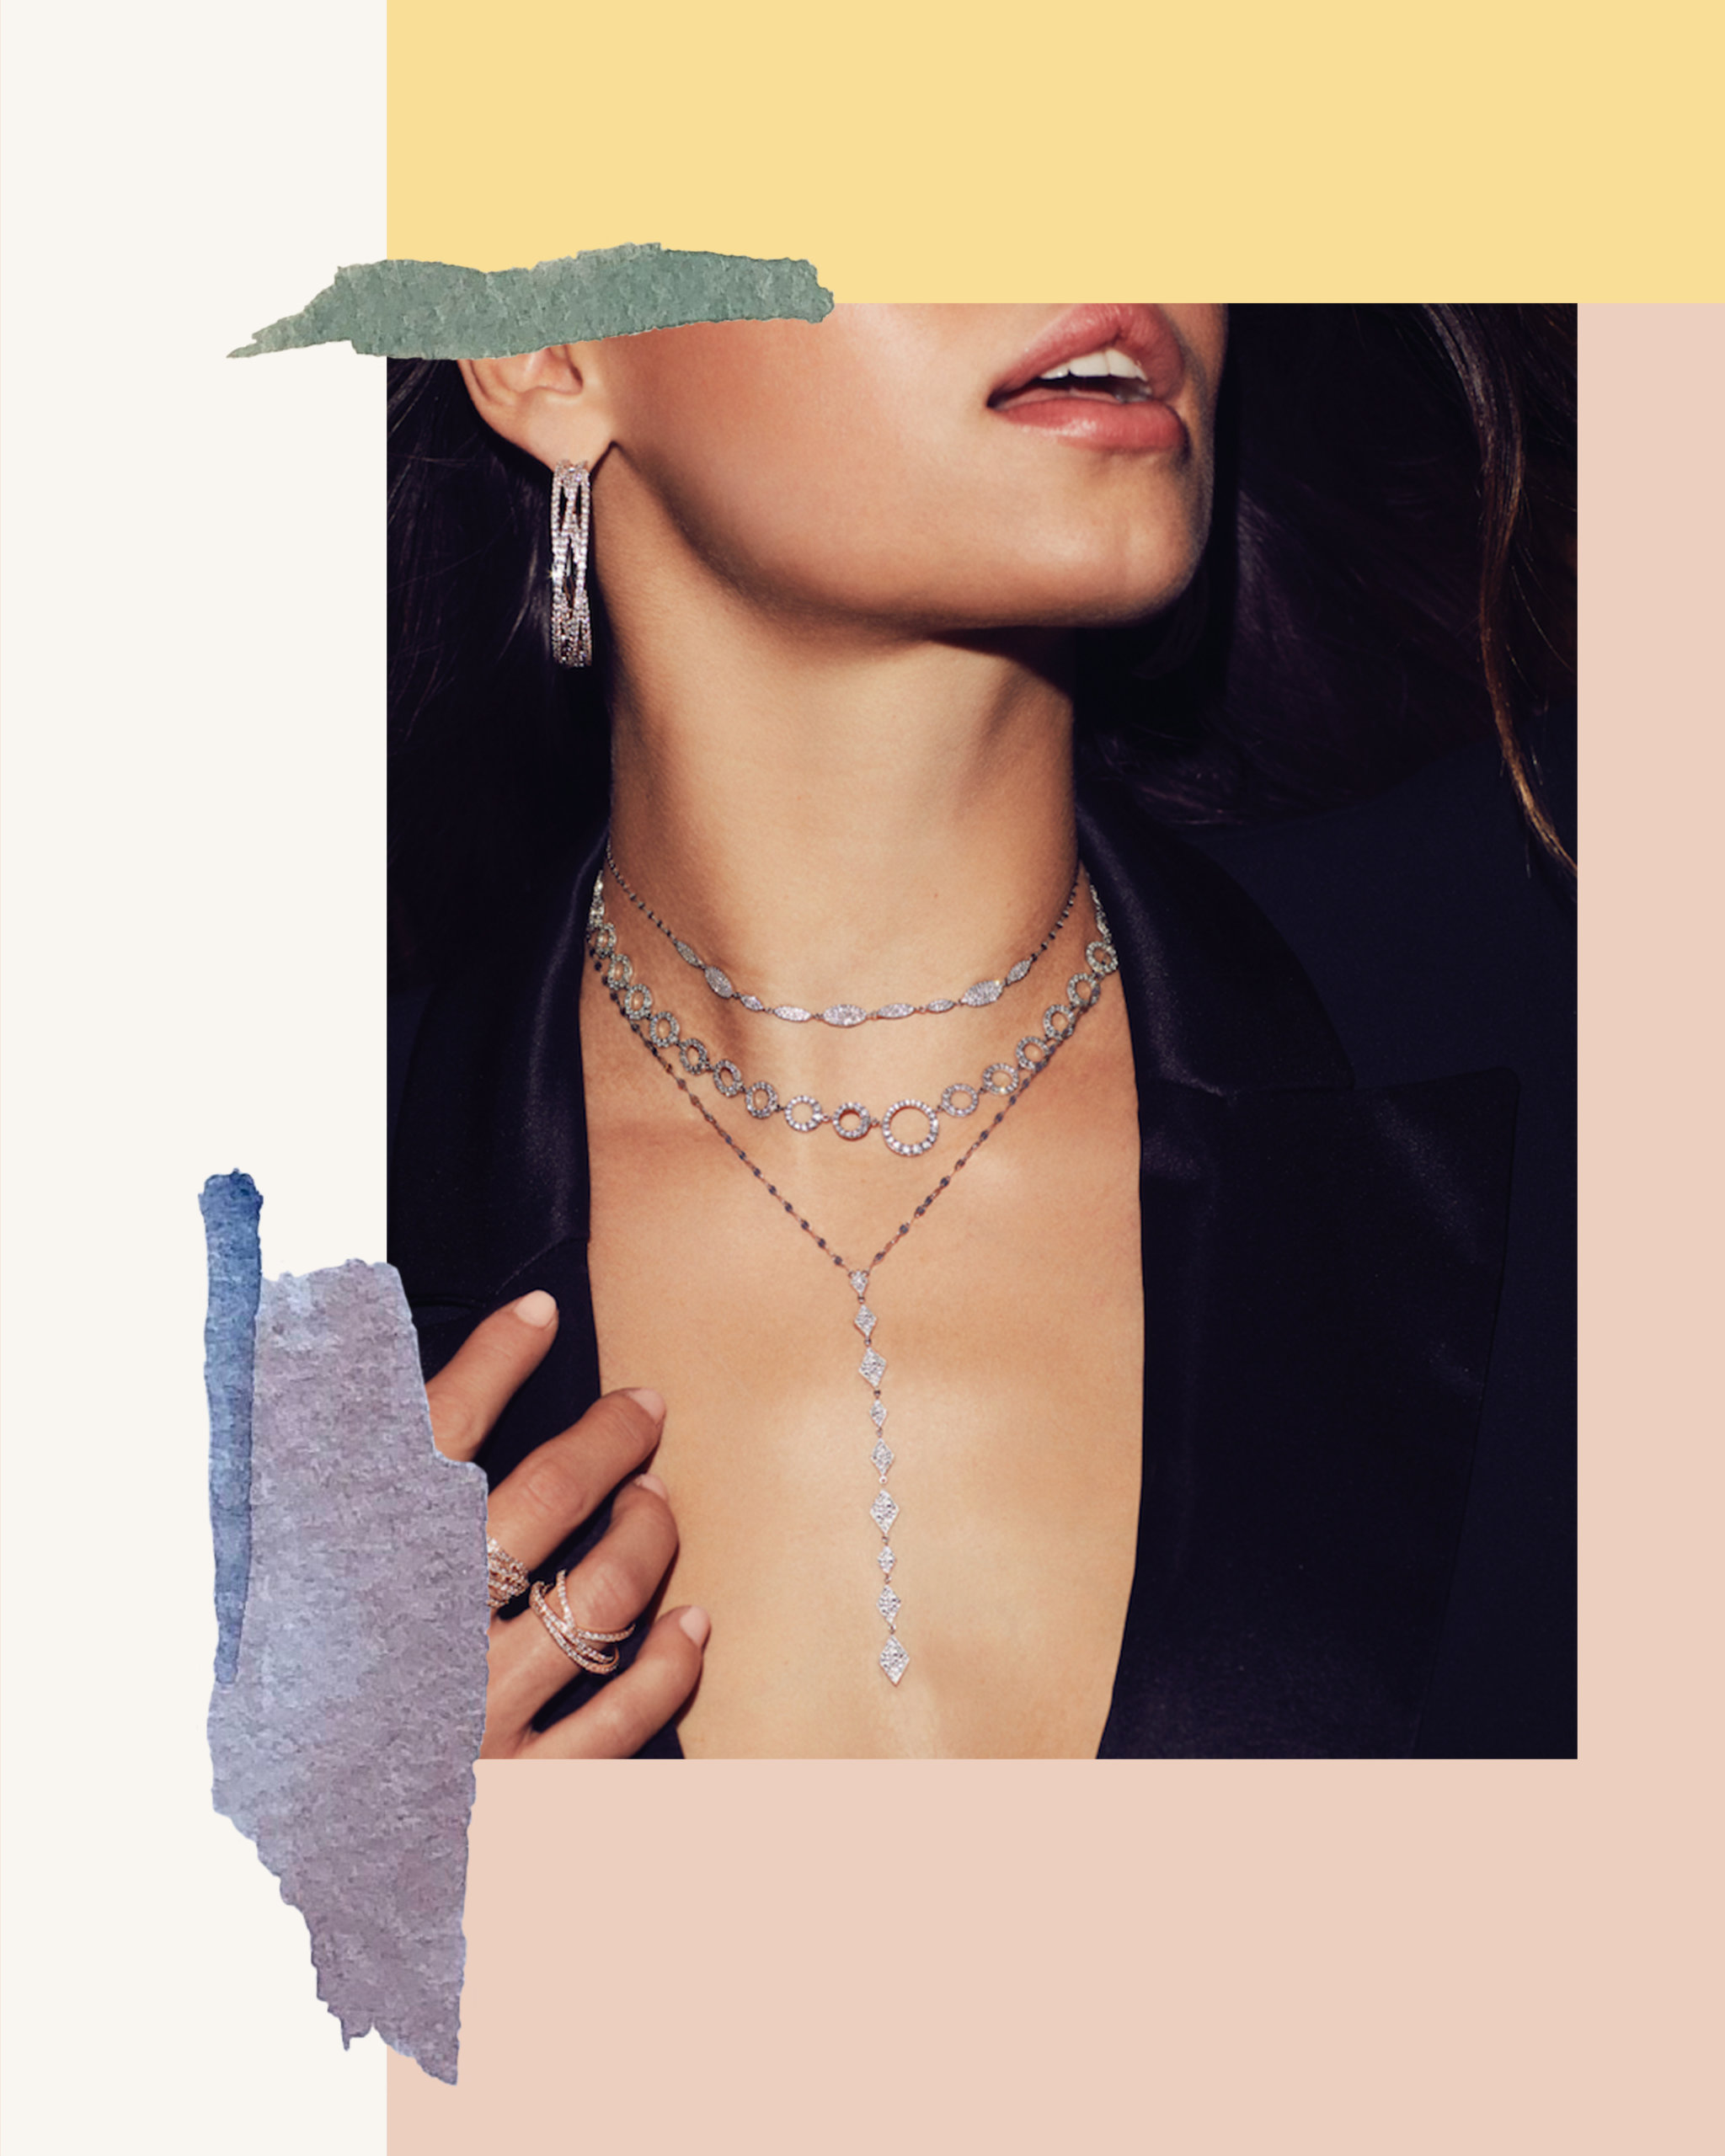 Lozenge cut, marquise cut, and pave diamonds set within gold layered necklaces and chokers from Jenna Blake